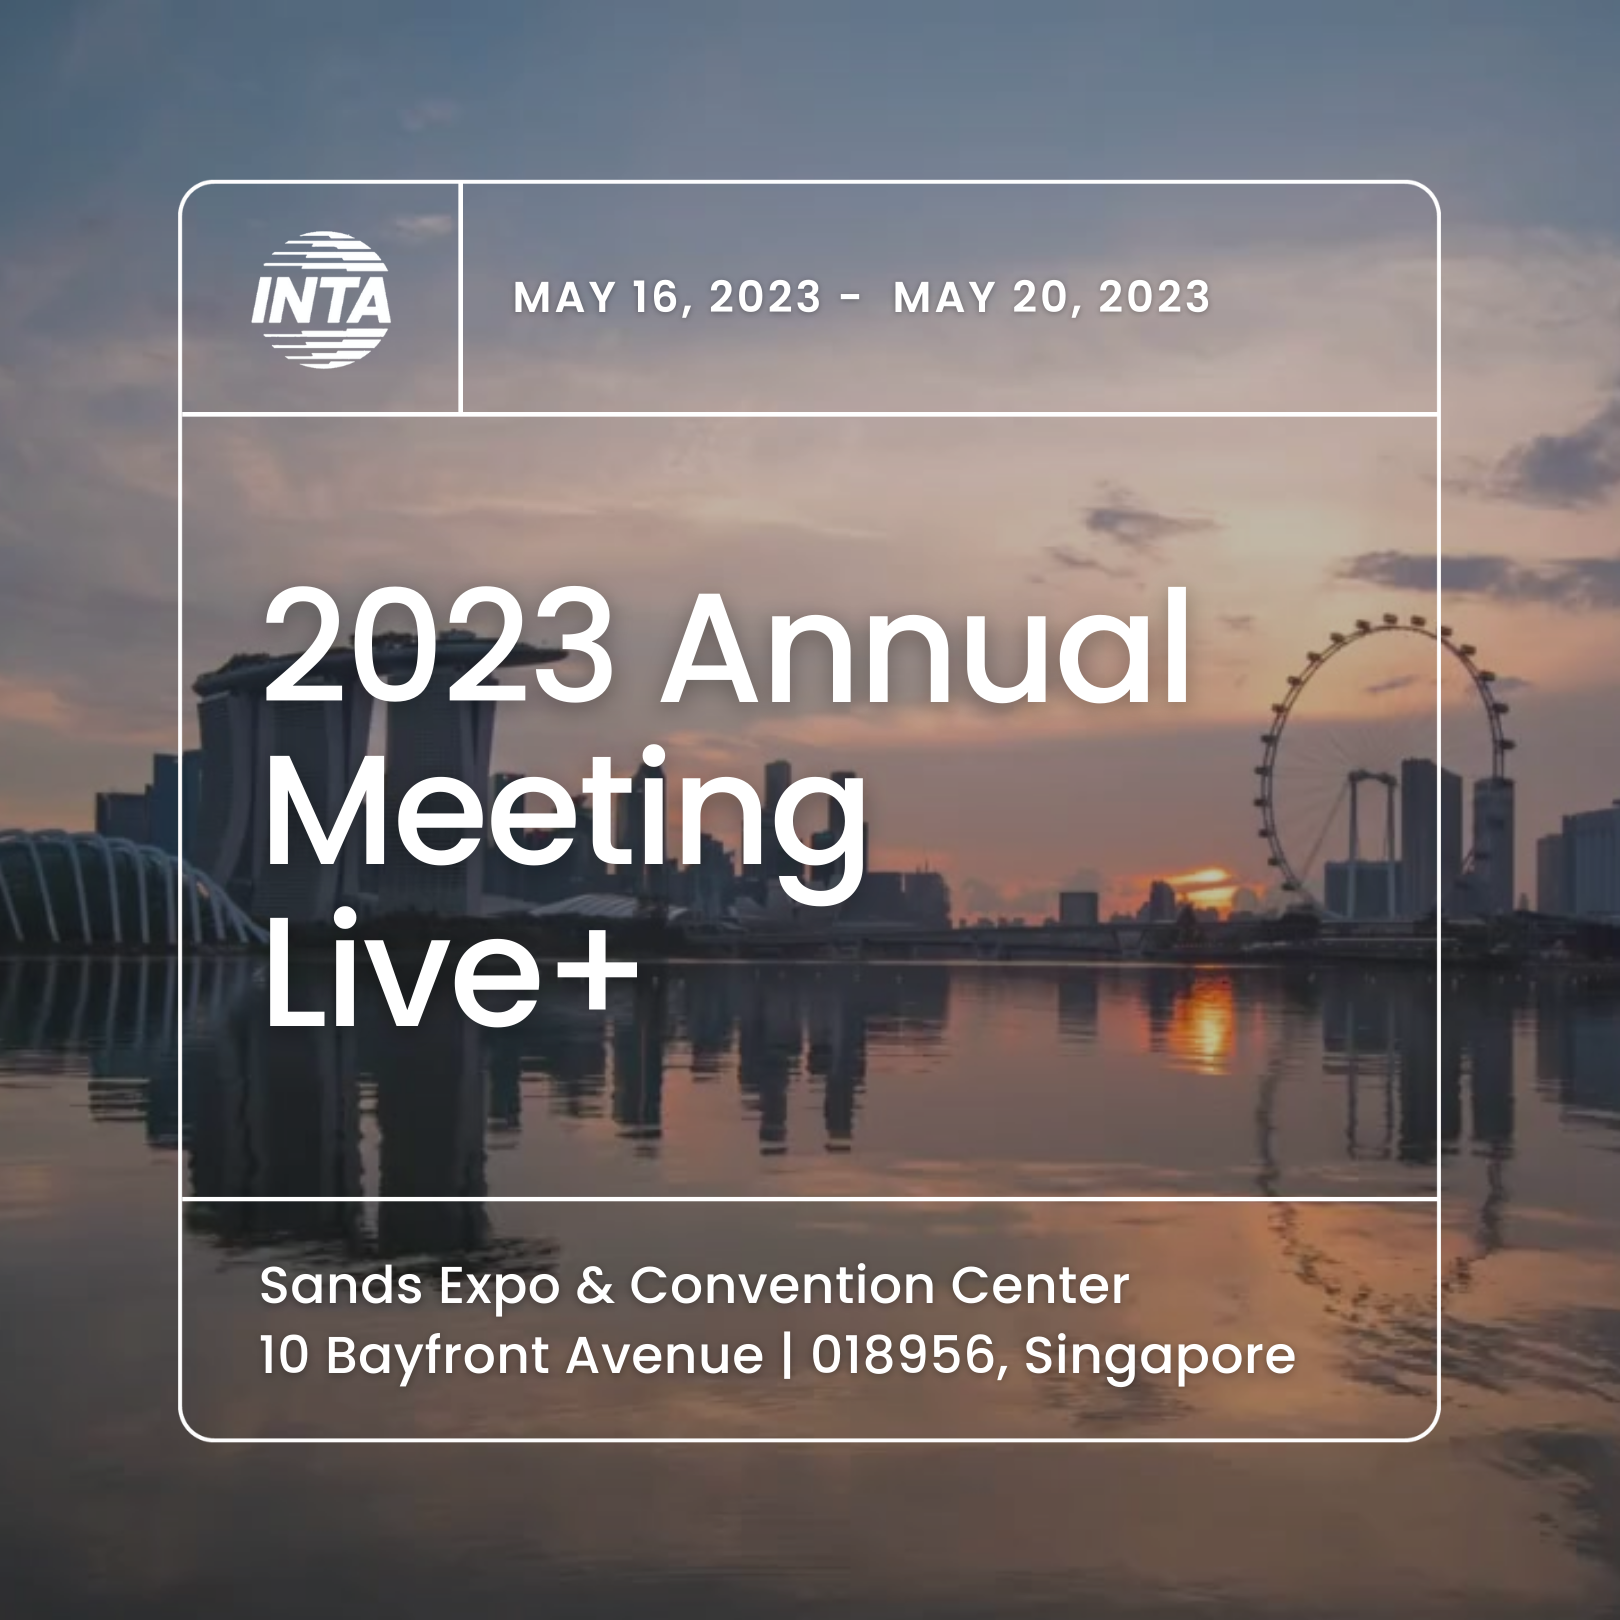 INTA 2023 Annual Meeting – シンガポール開催